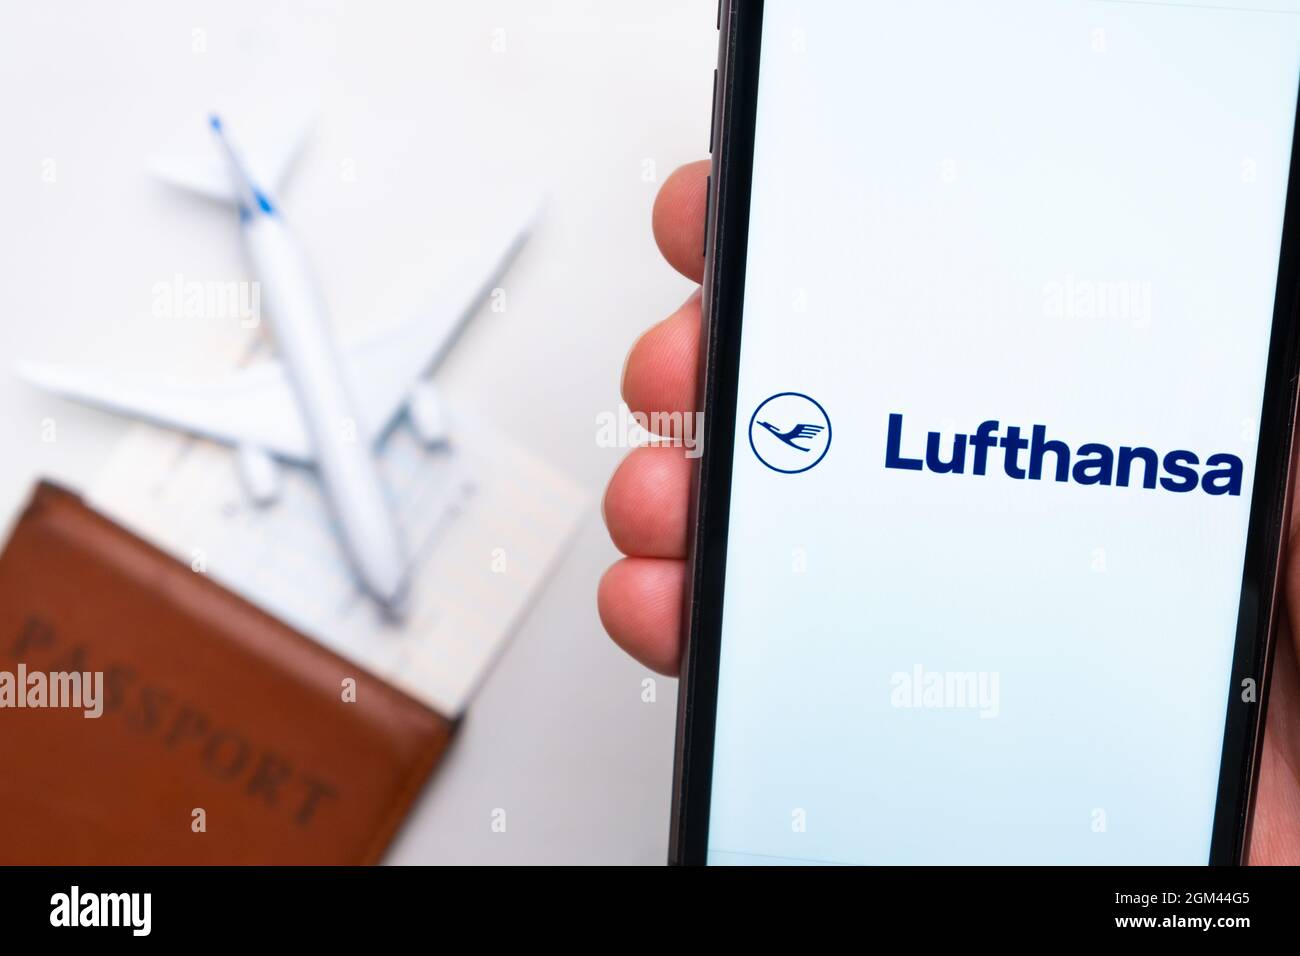 Lufthansa airline company app or logo displayed on a mobile phone with passport, boarding pass and plane on the background, September 2021, San Stock Photo